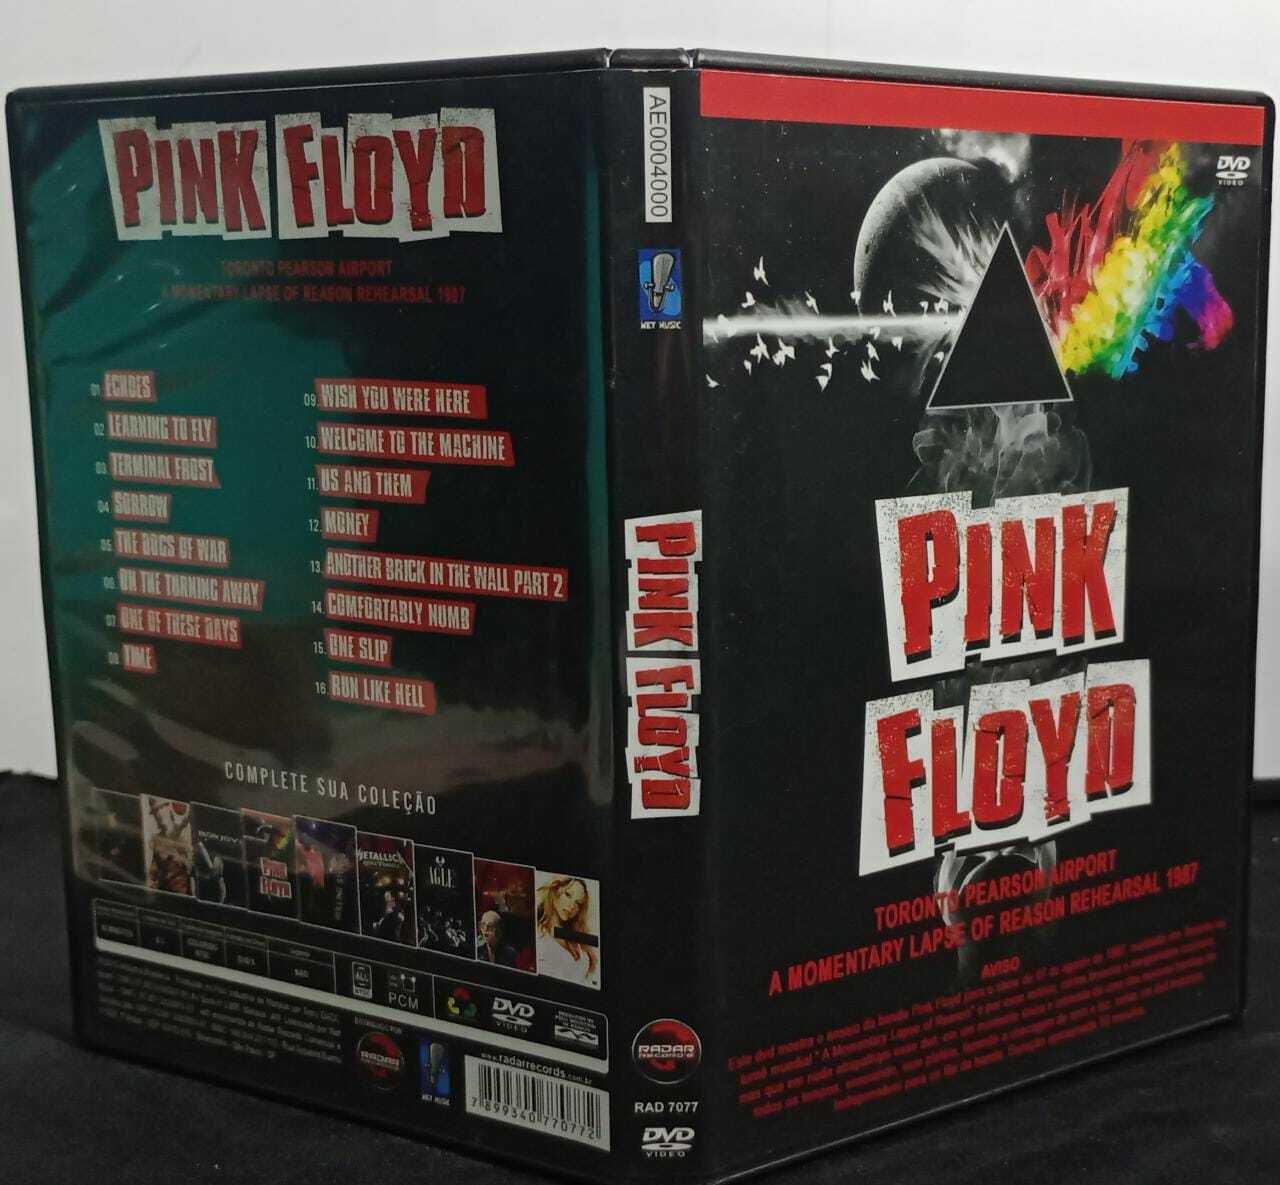 DVD - Pink Floyd - Toronto Pearson Airport A Momentary Lapse Of Reason Rehearsal 1987